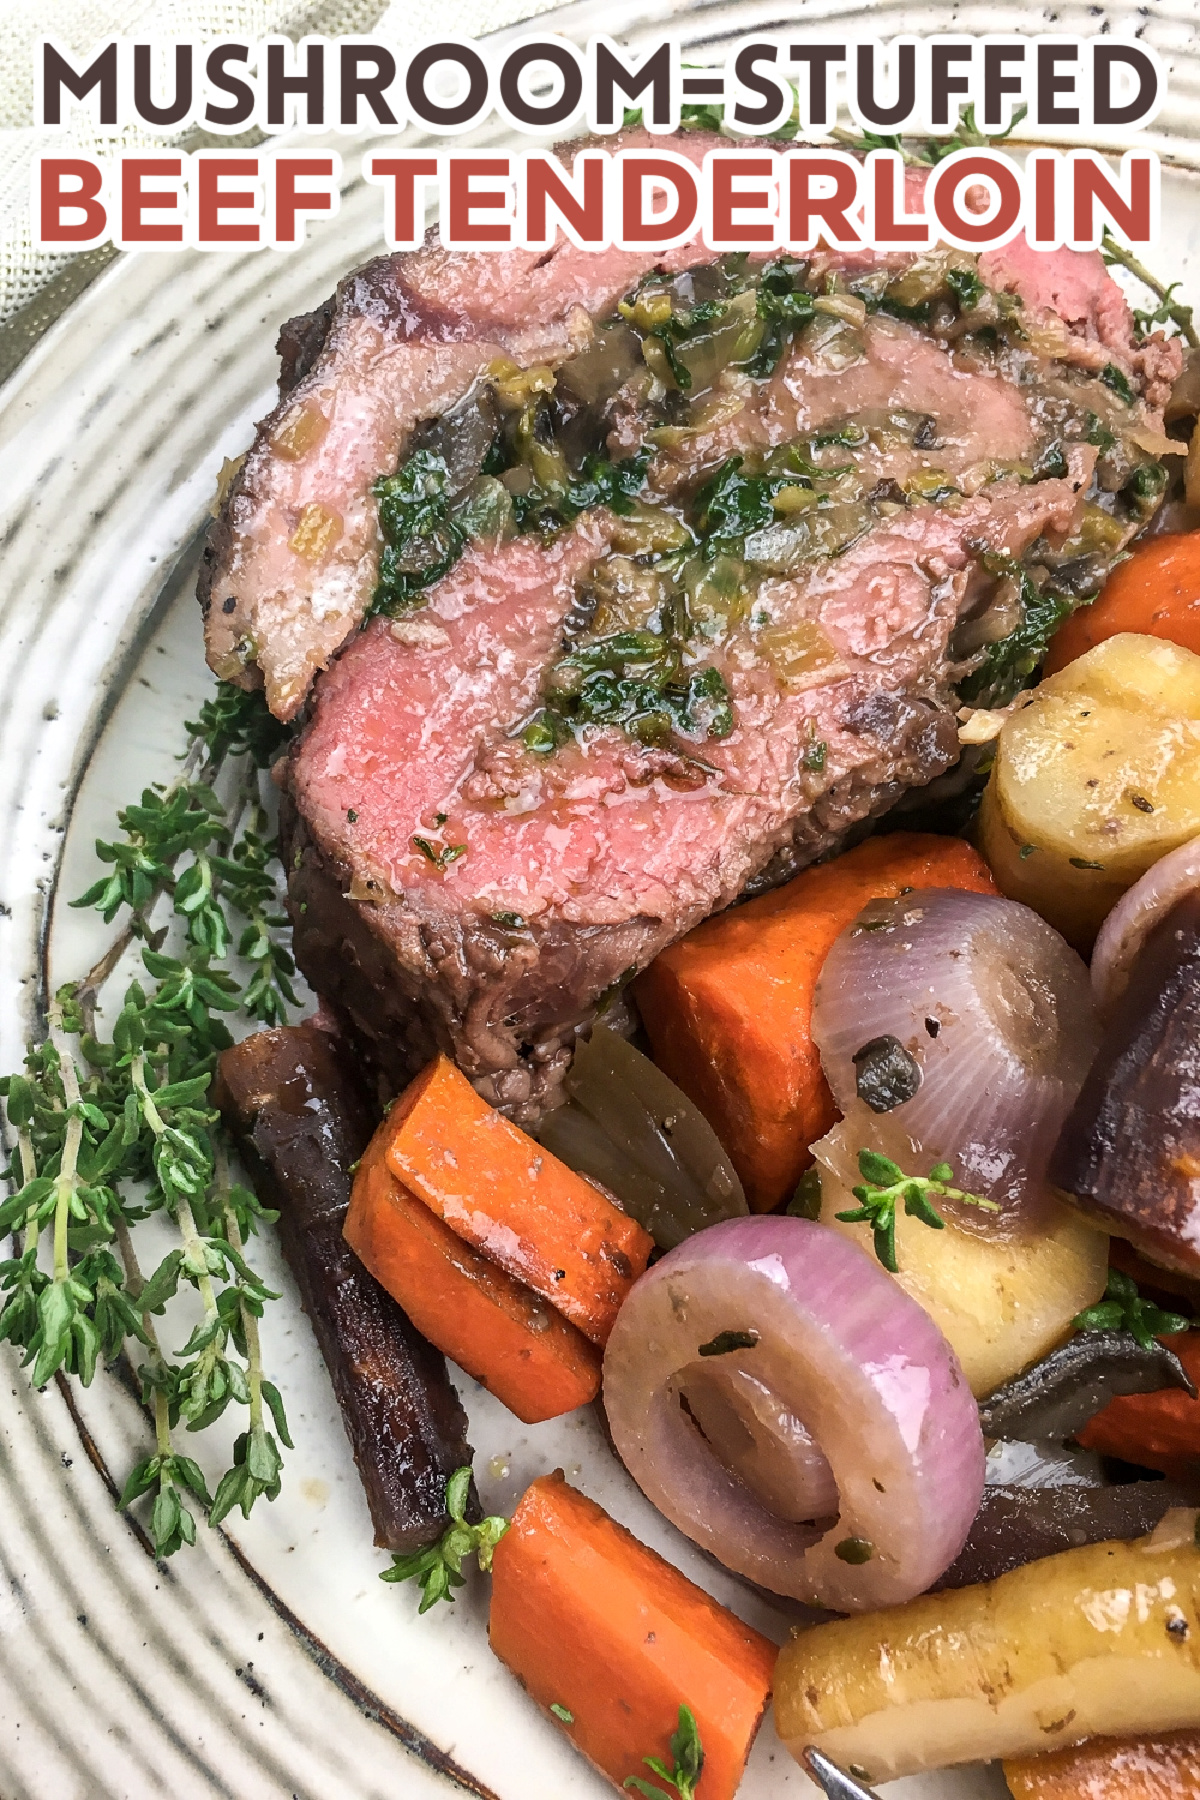 A delicious and easy spinach and mushroom-stuffed beef tenderloin recipe. Perfect for any occasion from weekday meals to Easter dinner!